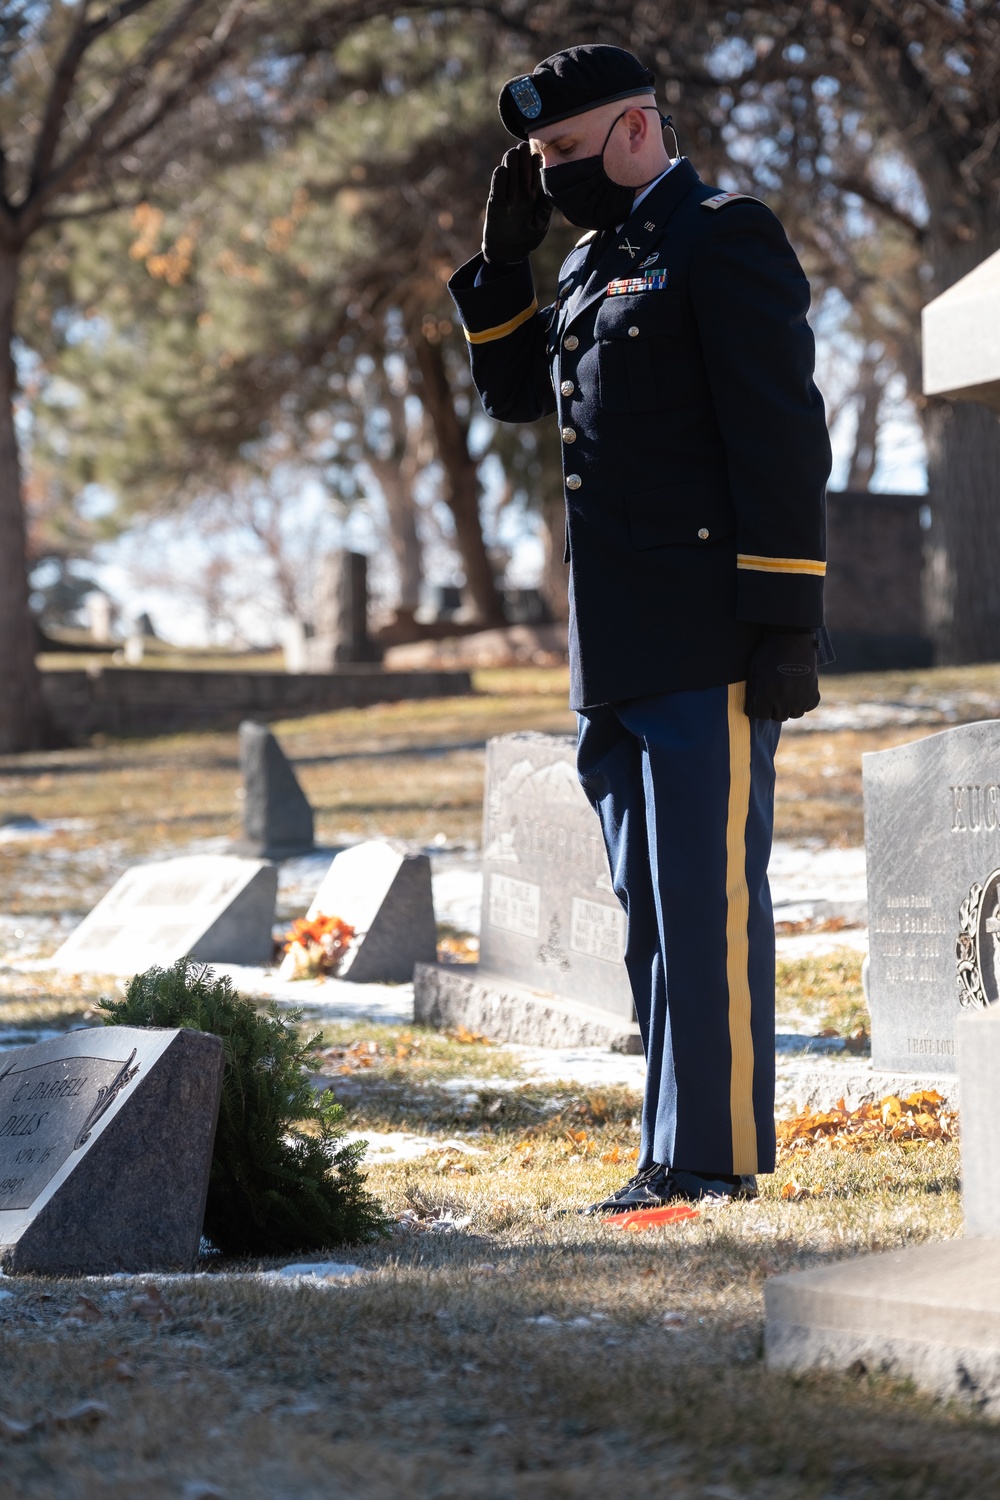 1st SBCT, 4th ID Soldiers participate in National Wreaths Across America Day